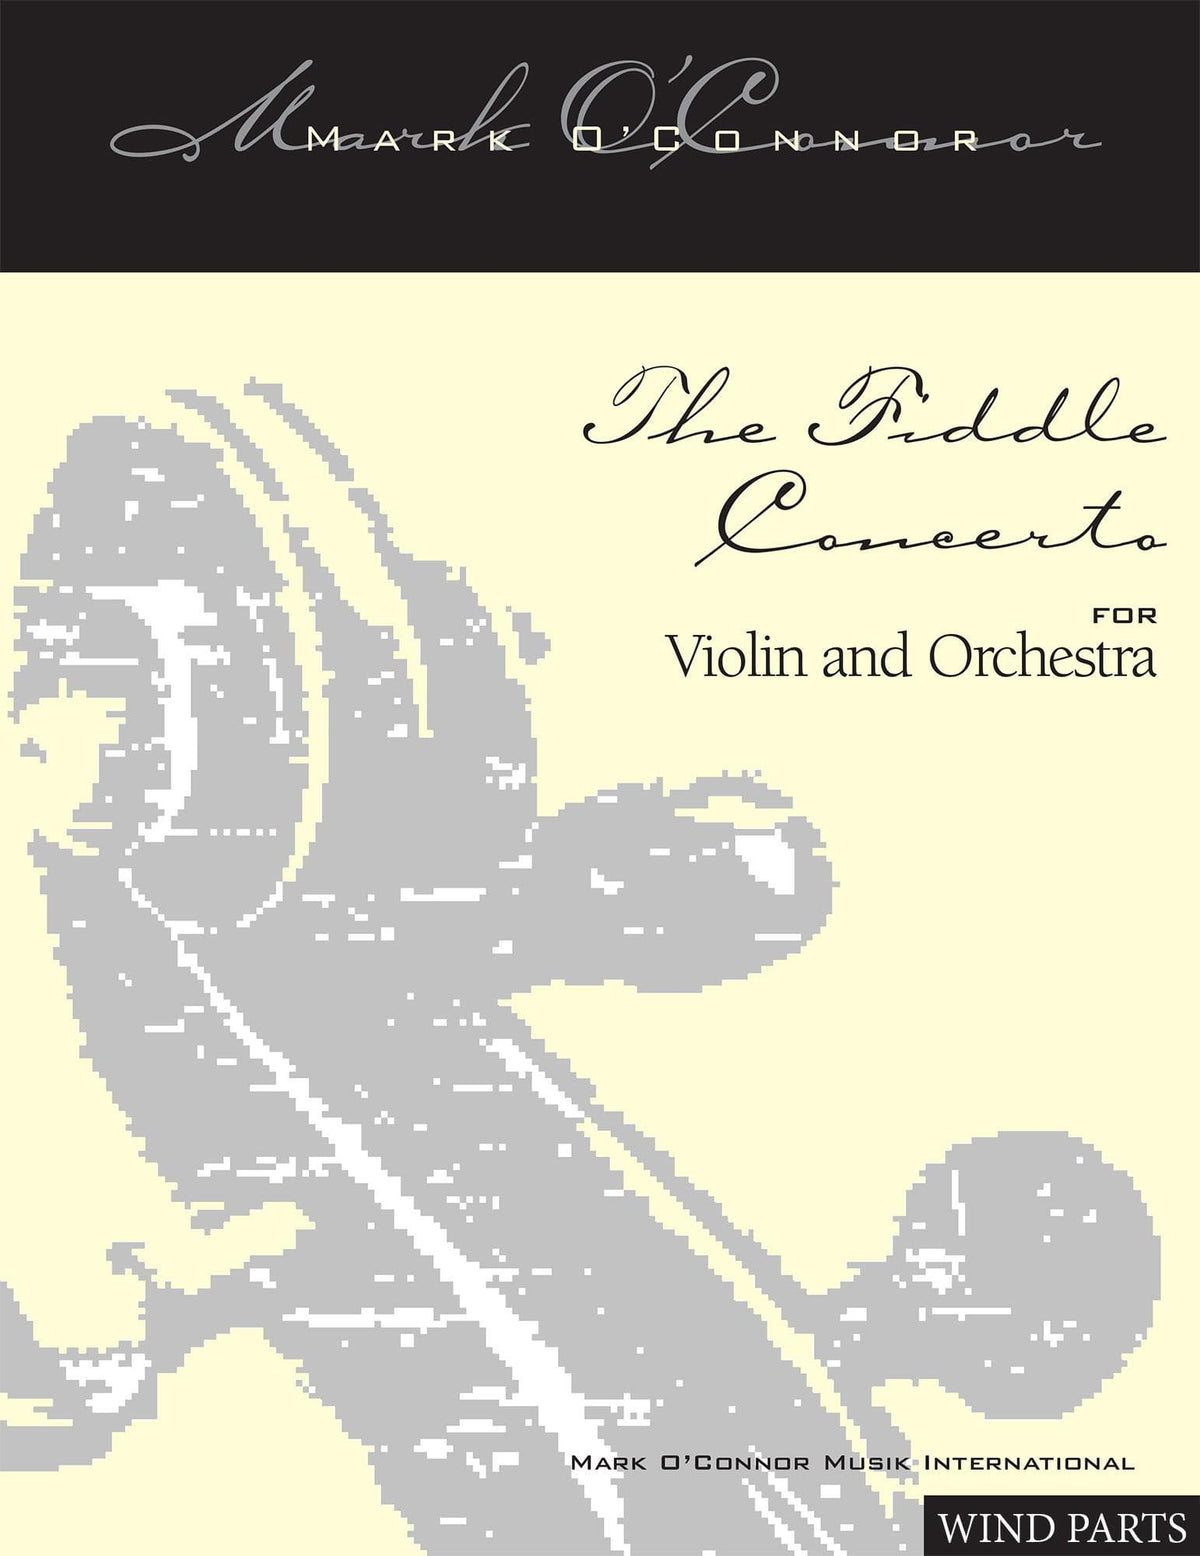 O'Connor, Mark - The FIDDLE CONCERTO for Violin and Orchestra - Wind Parts - Digital Download